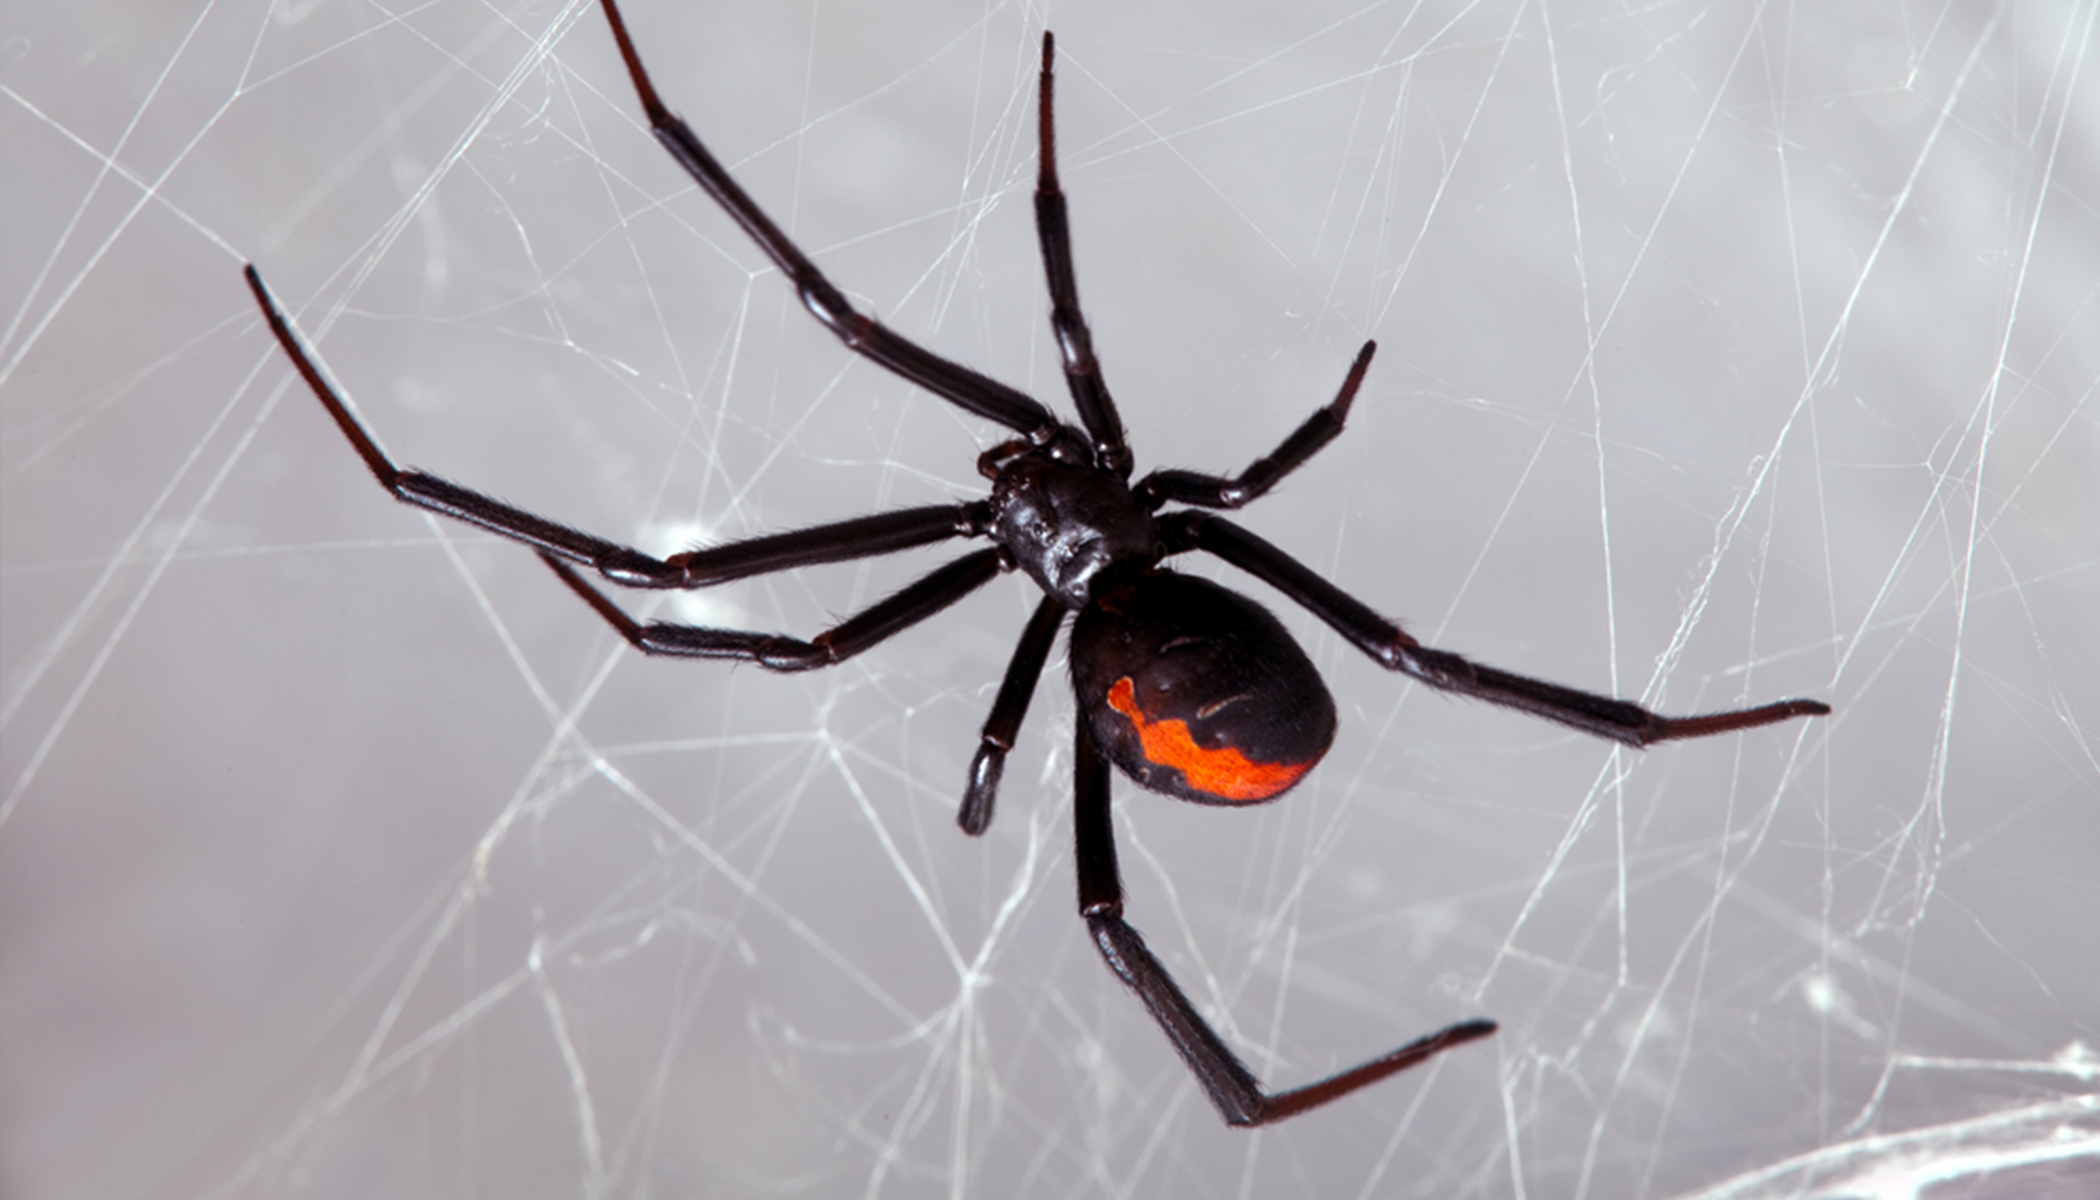 Three young brothers let black widow bite them in hopes of turning into  Spider-Man 